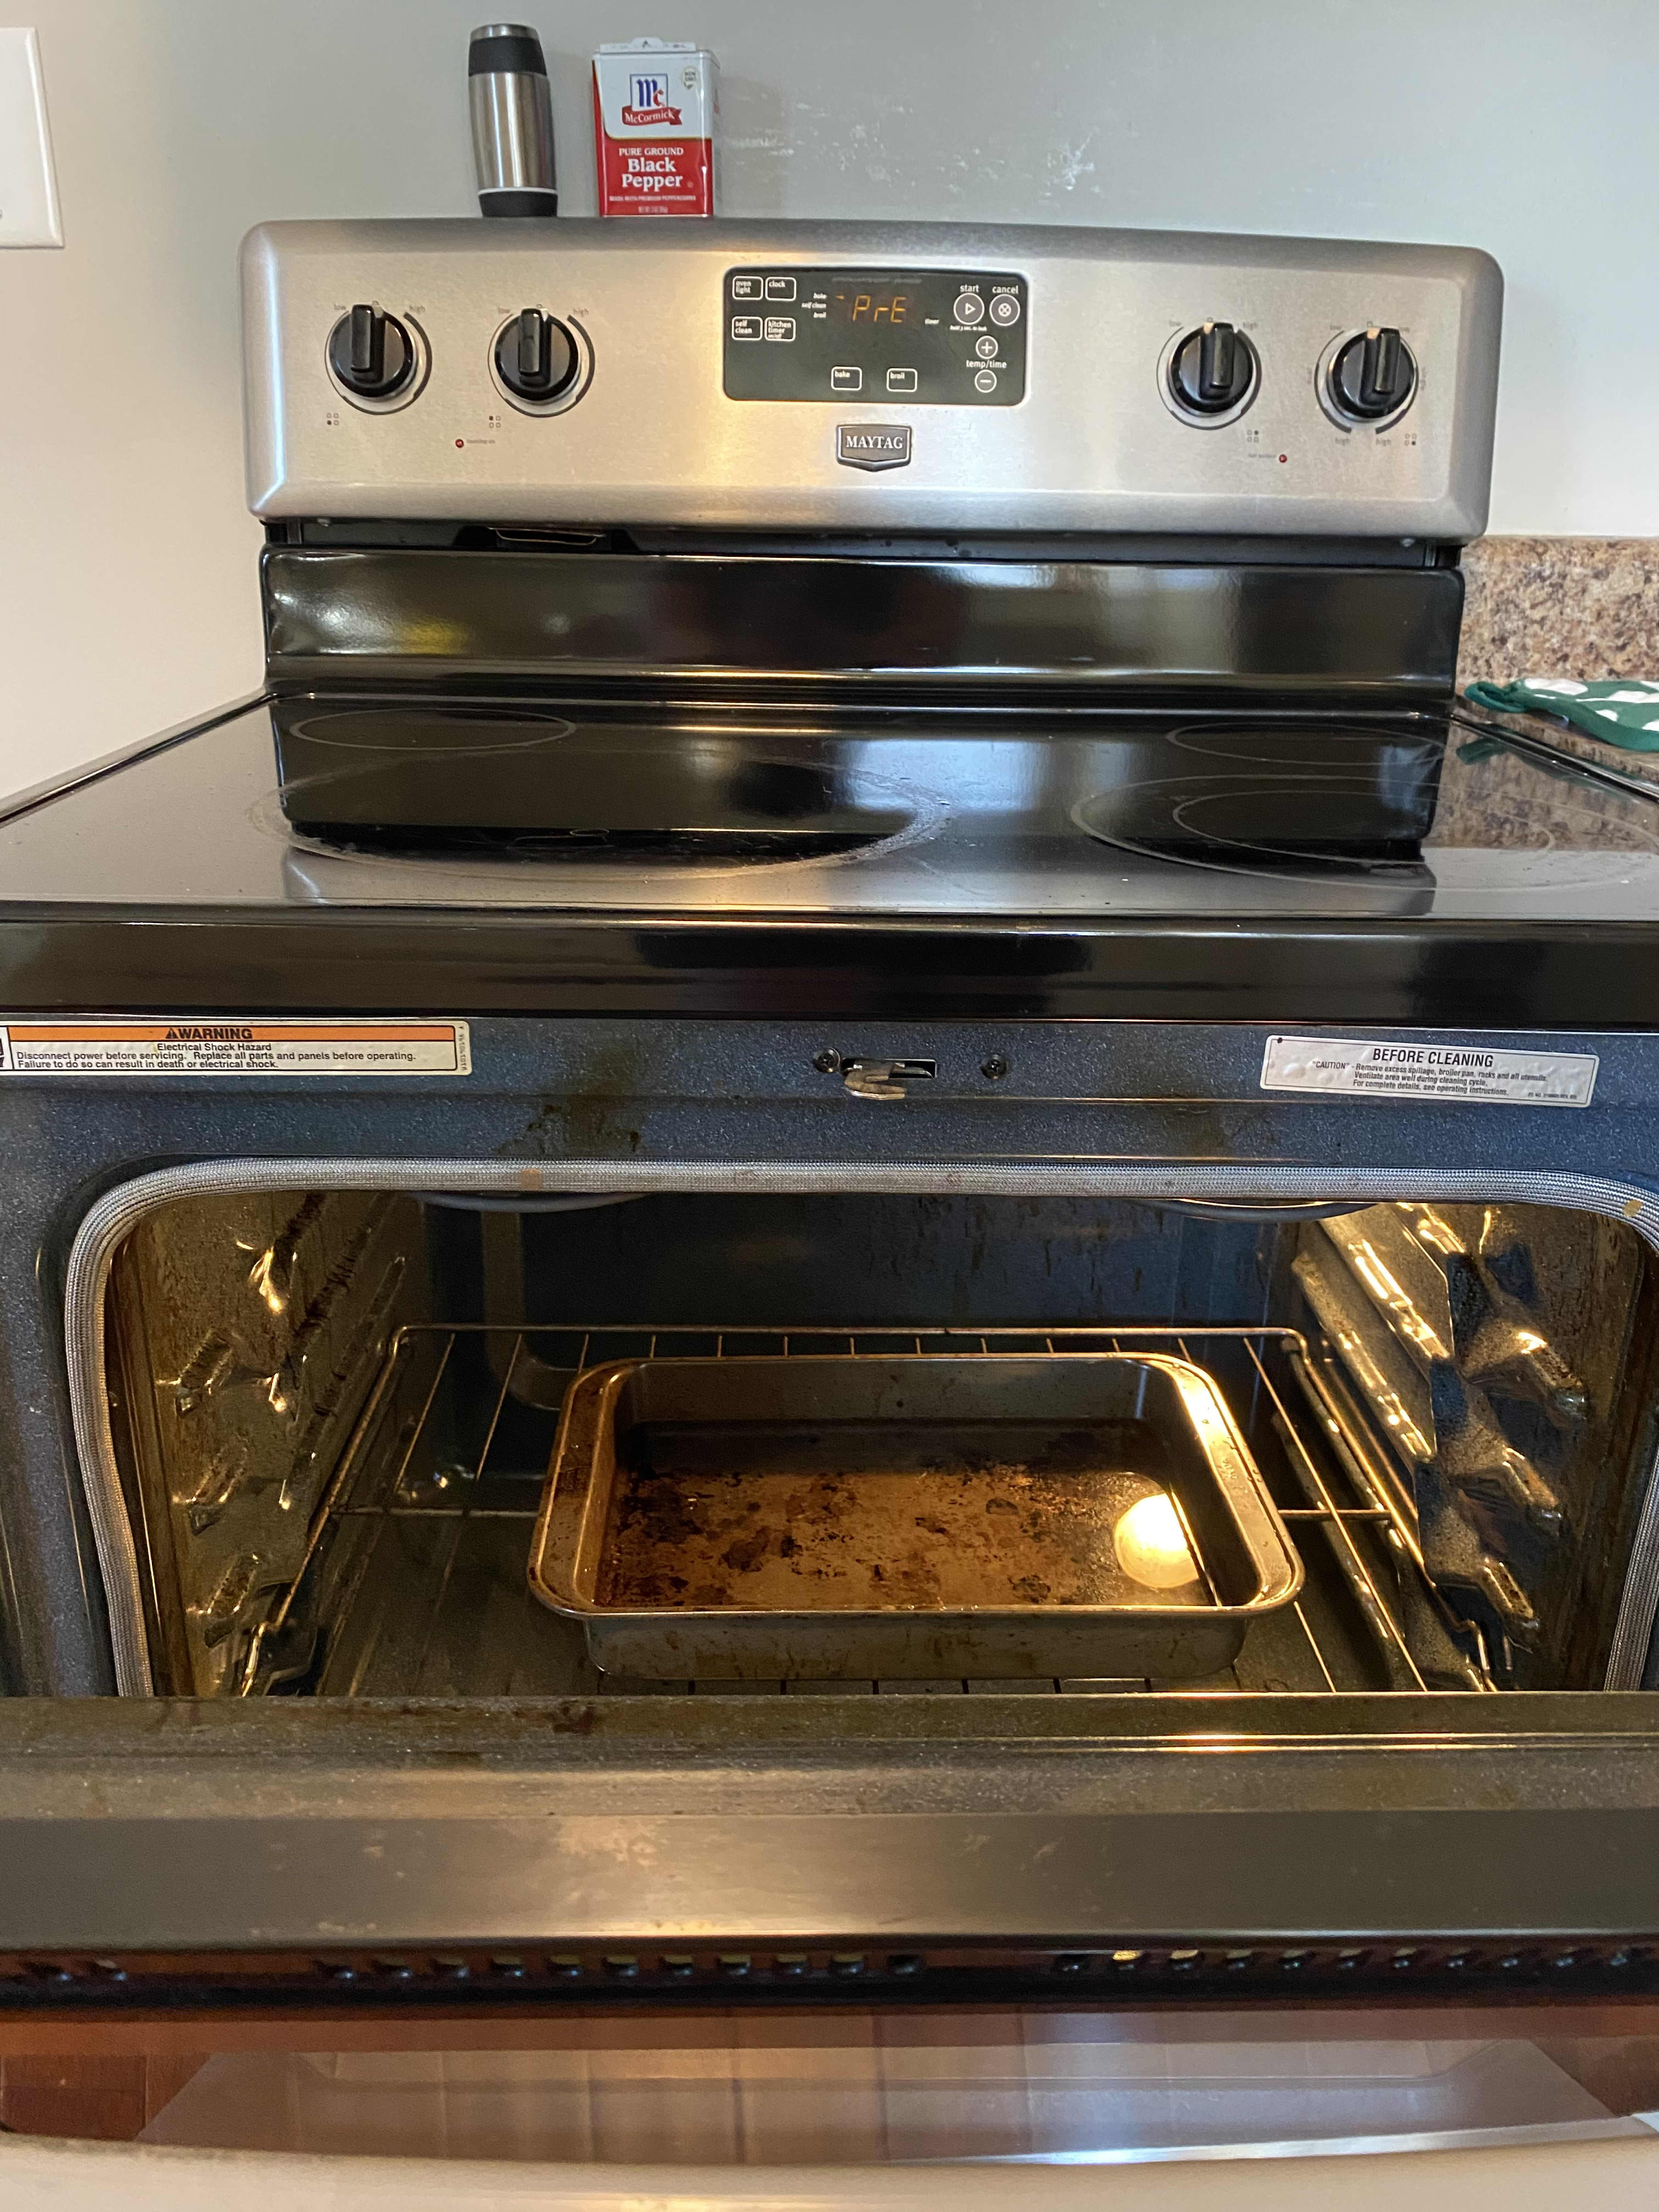 Self-Clean vs. Steam Clean Oven: What's the Difference